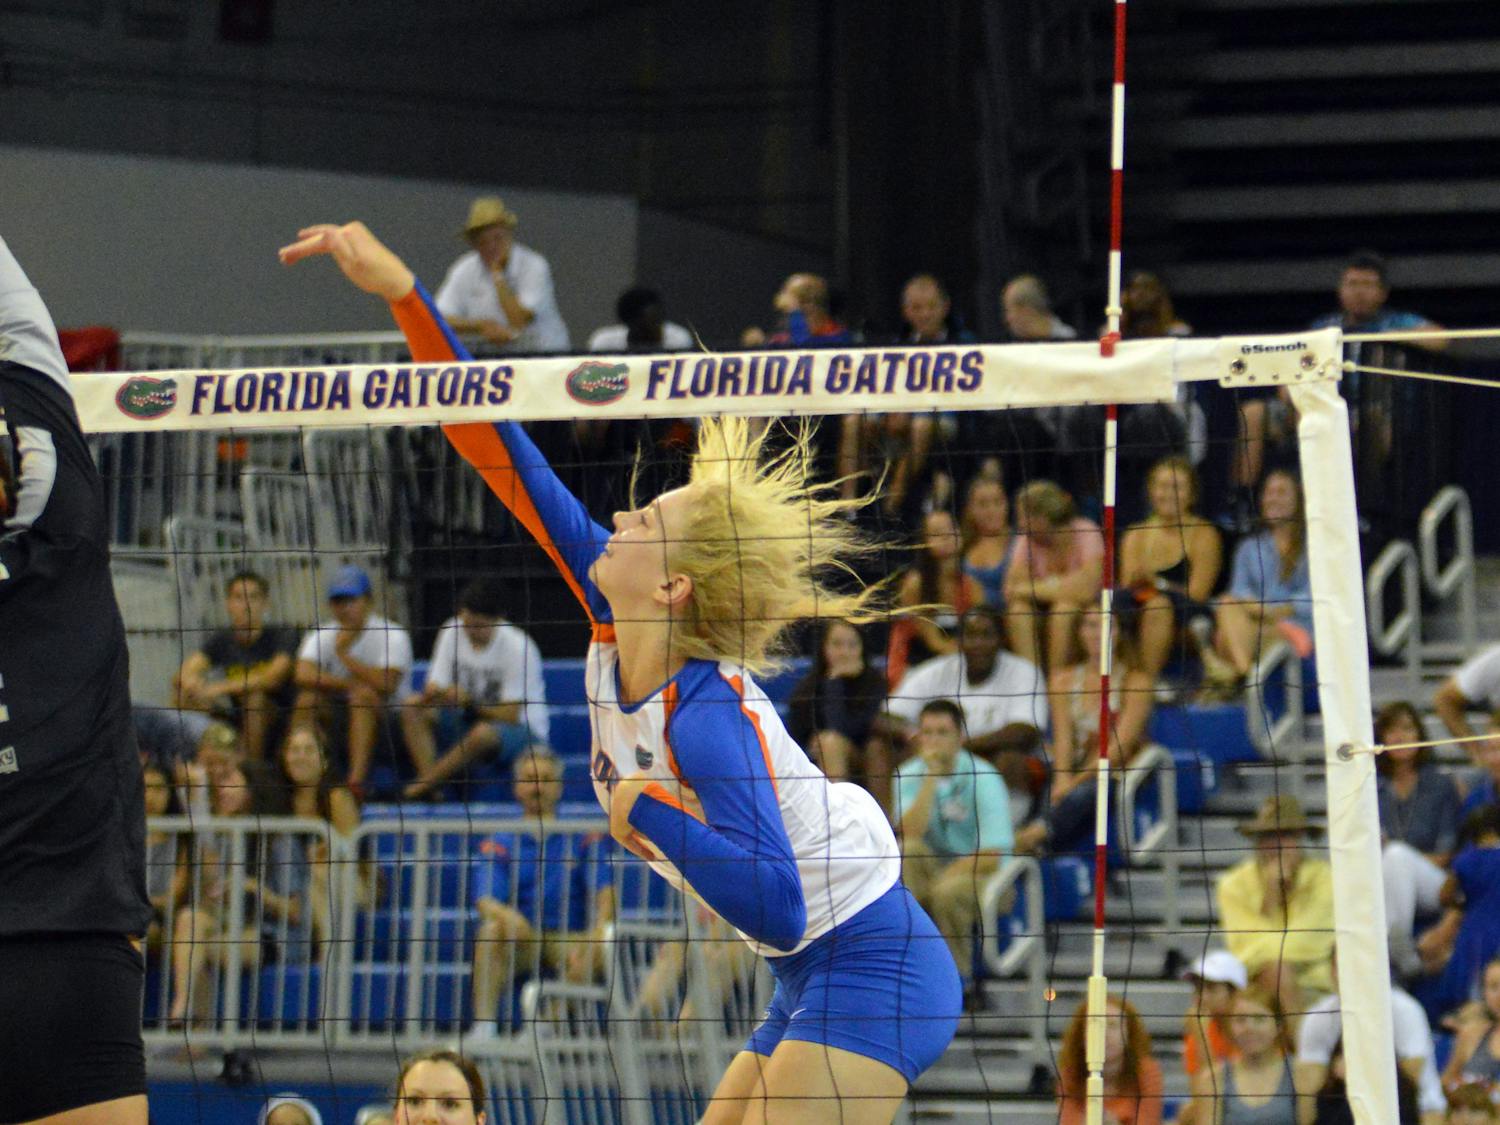 Freshman outside hitter Carli Snyder attempts a kill during Florida's 3-0 win against Idaho in the O'Connell Center.